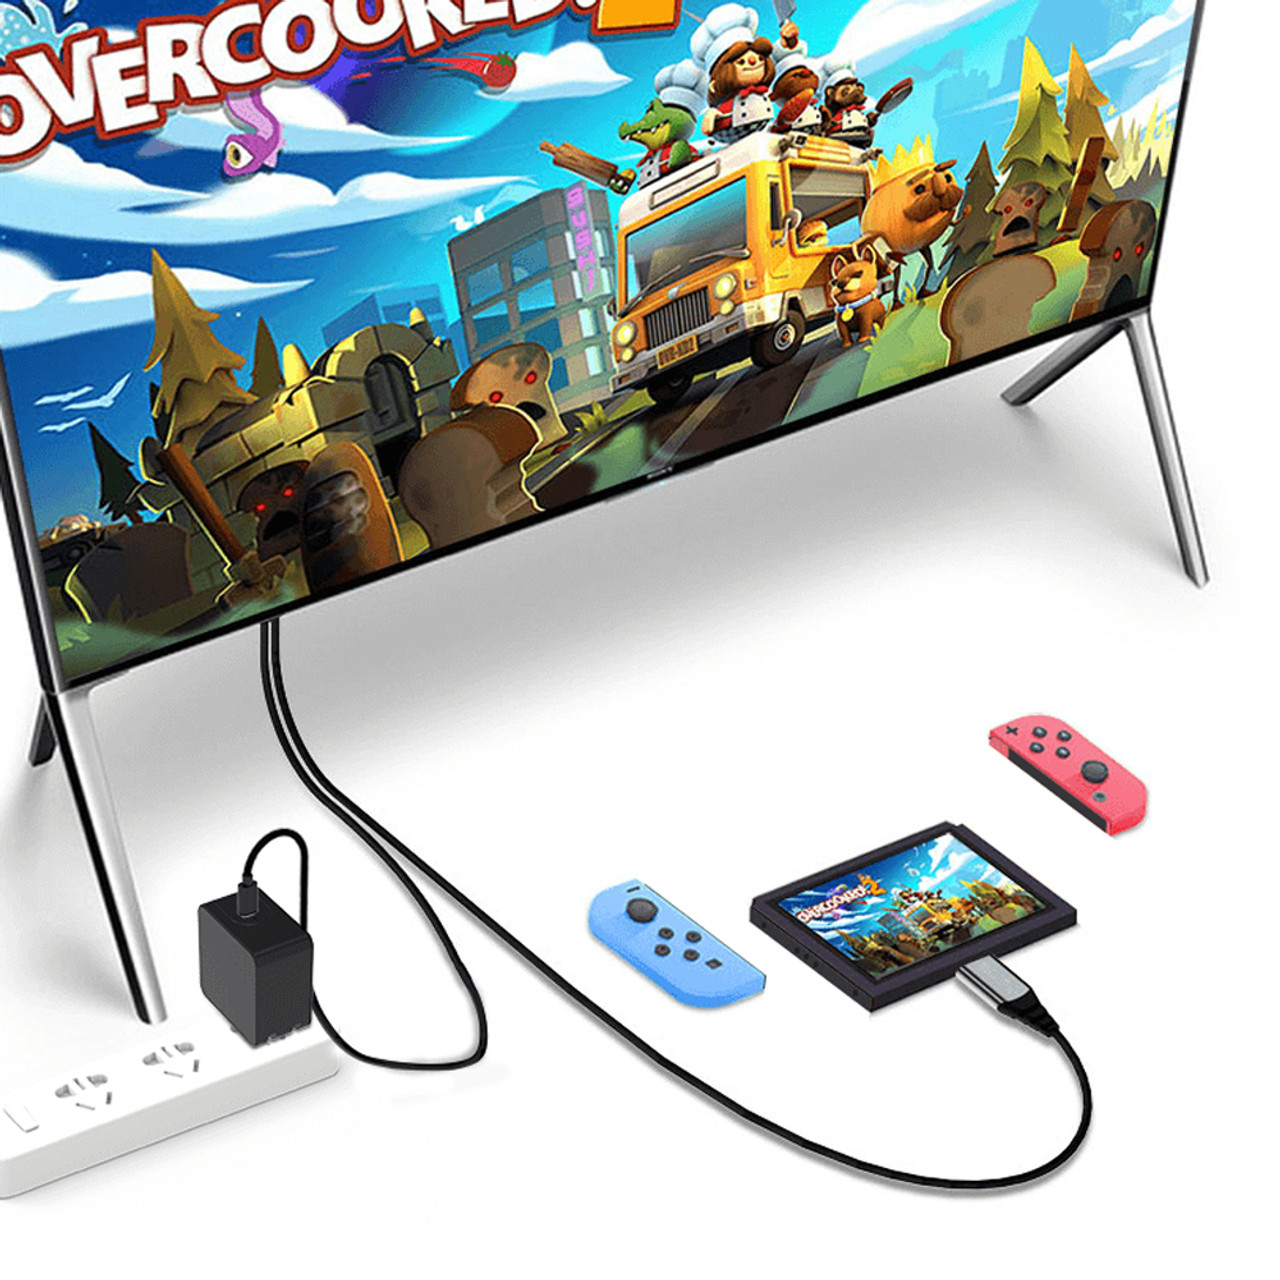 Brook Switch HDMI Cable available at VIDEOGAMESNEWYORK,VGNY